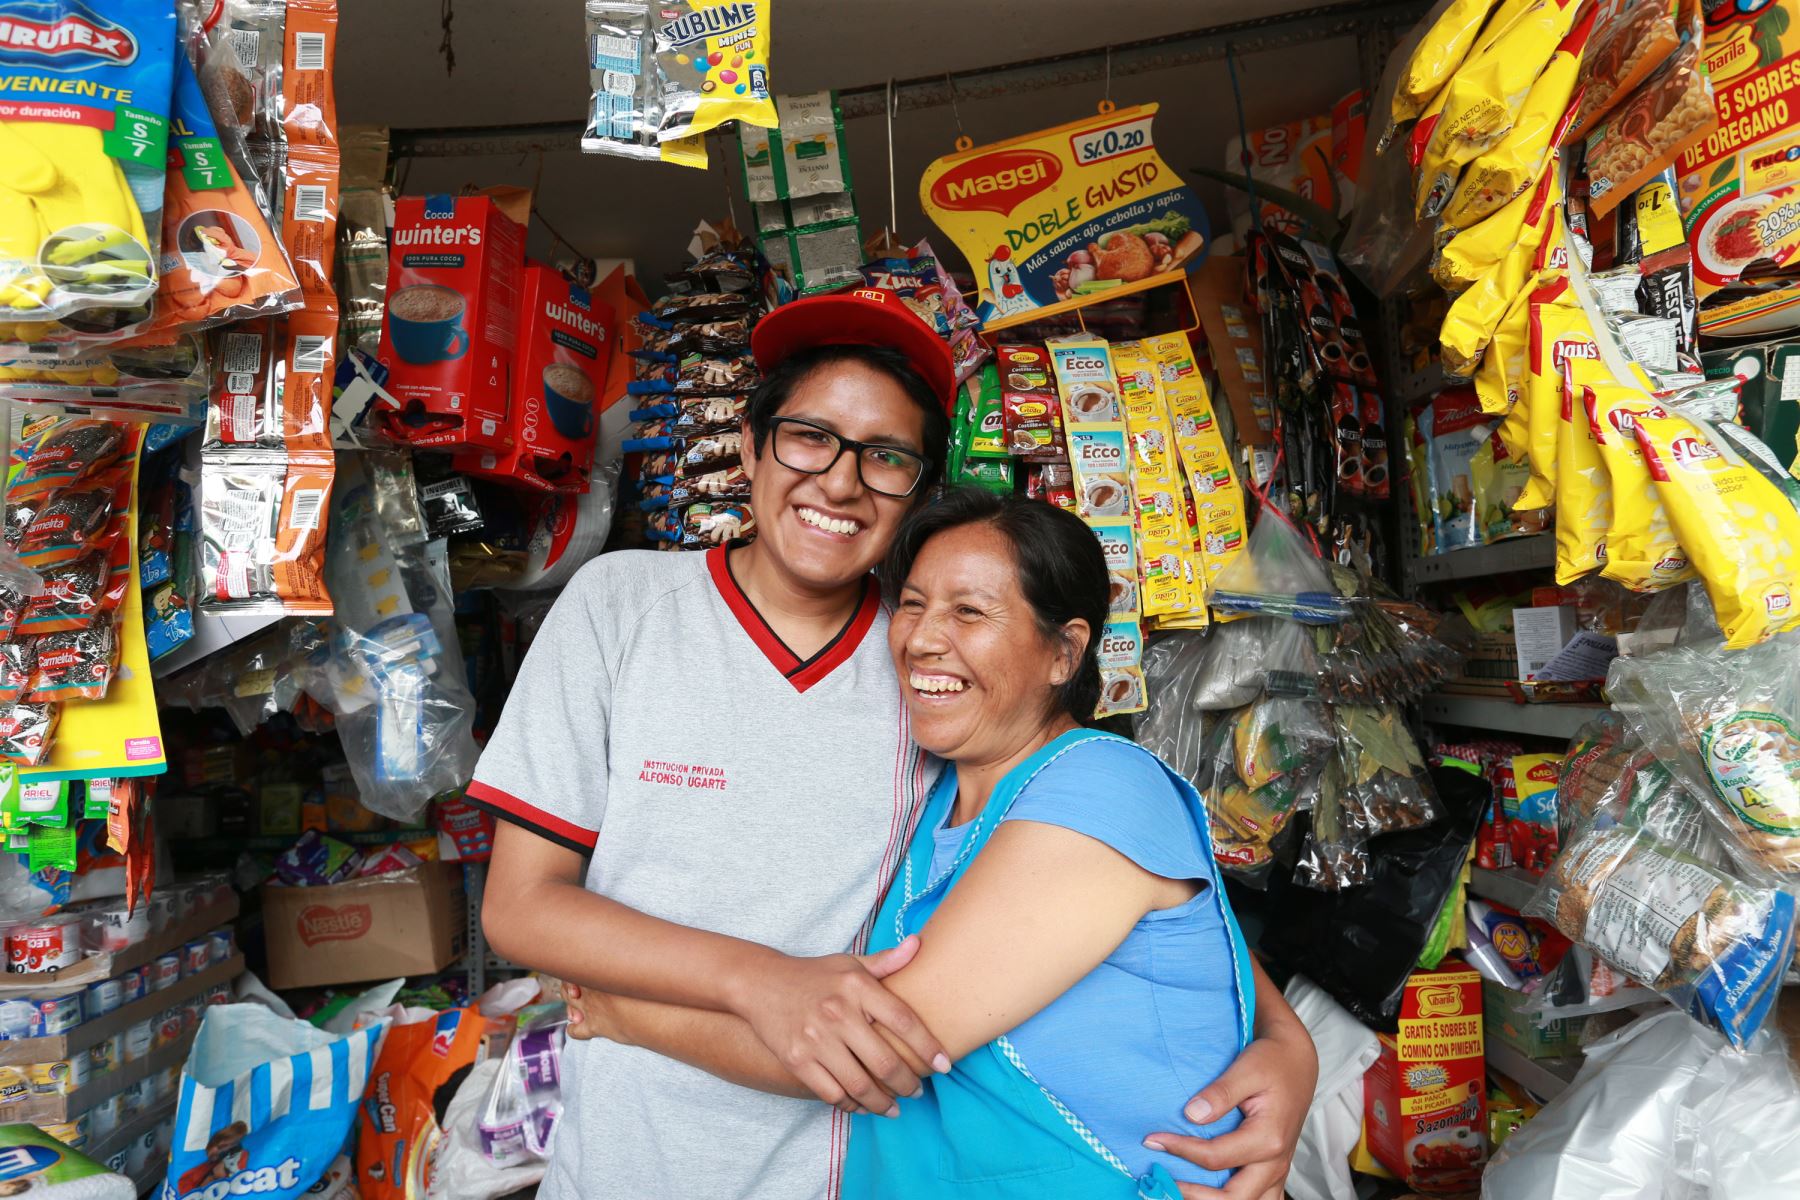 Peruvians rate their happiness at 16.21 on a scale from 1 to 20